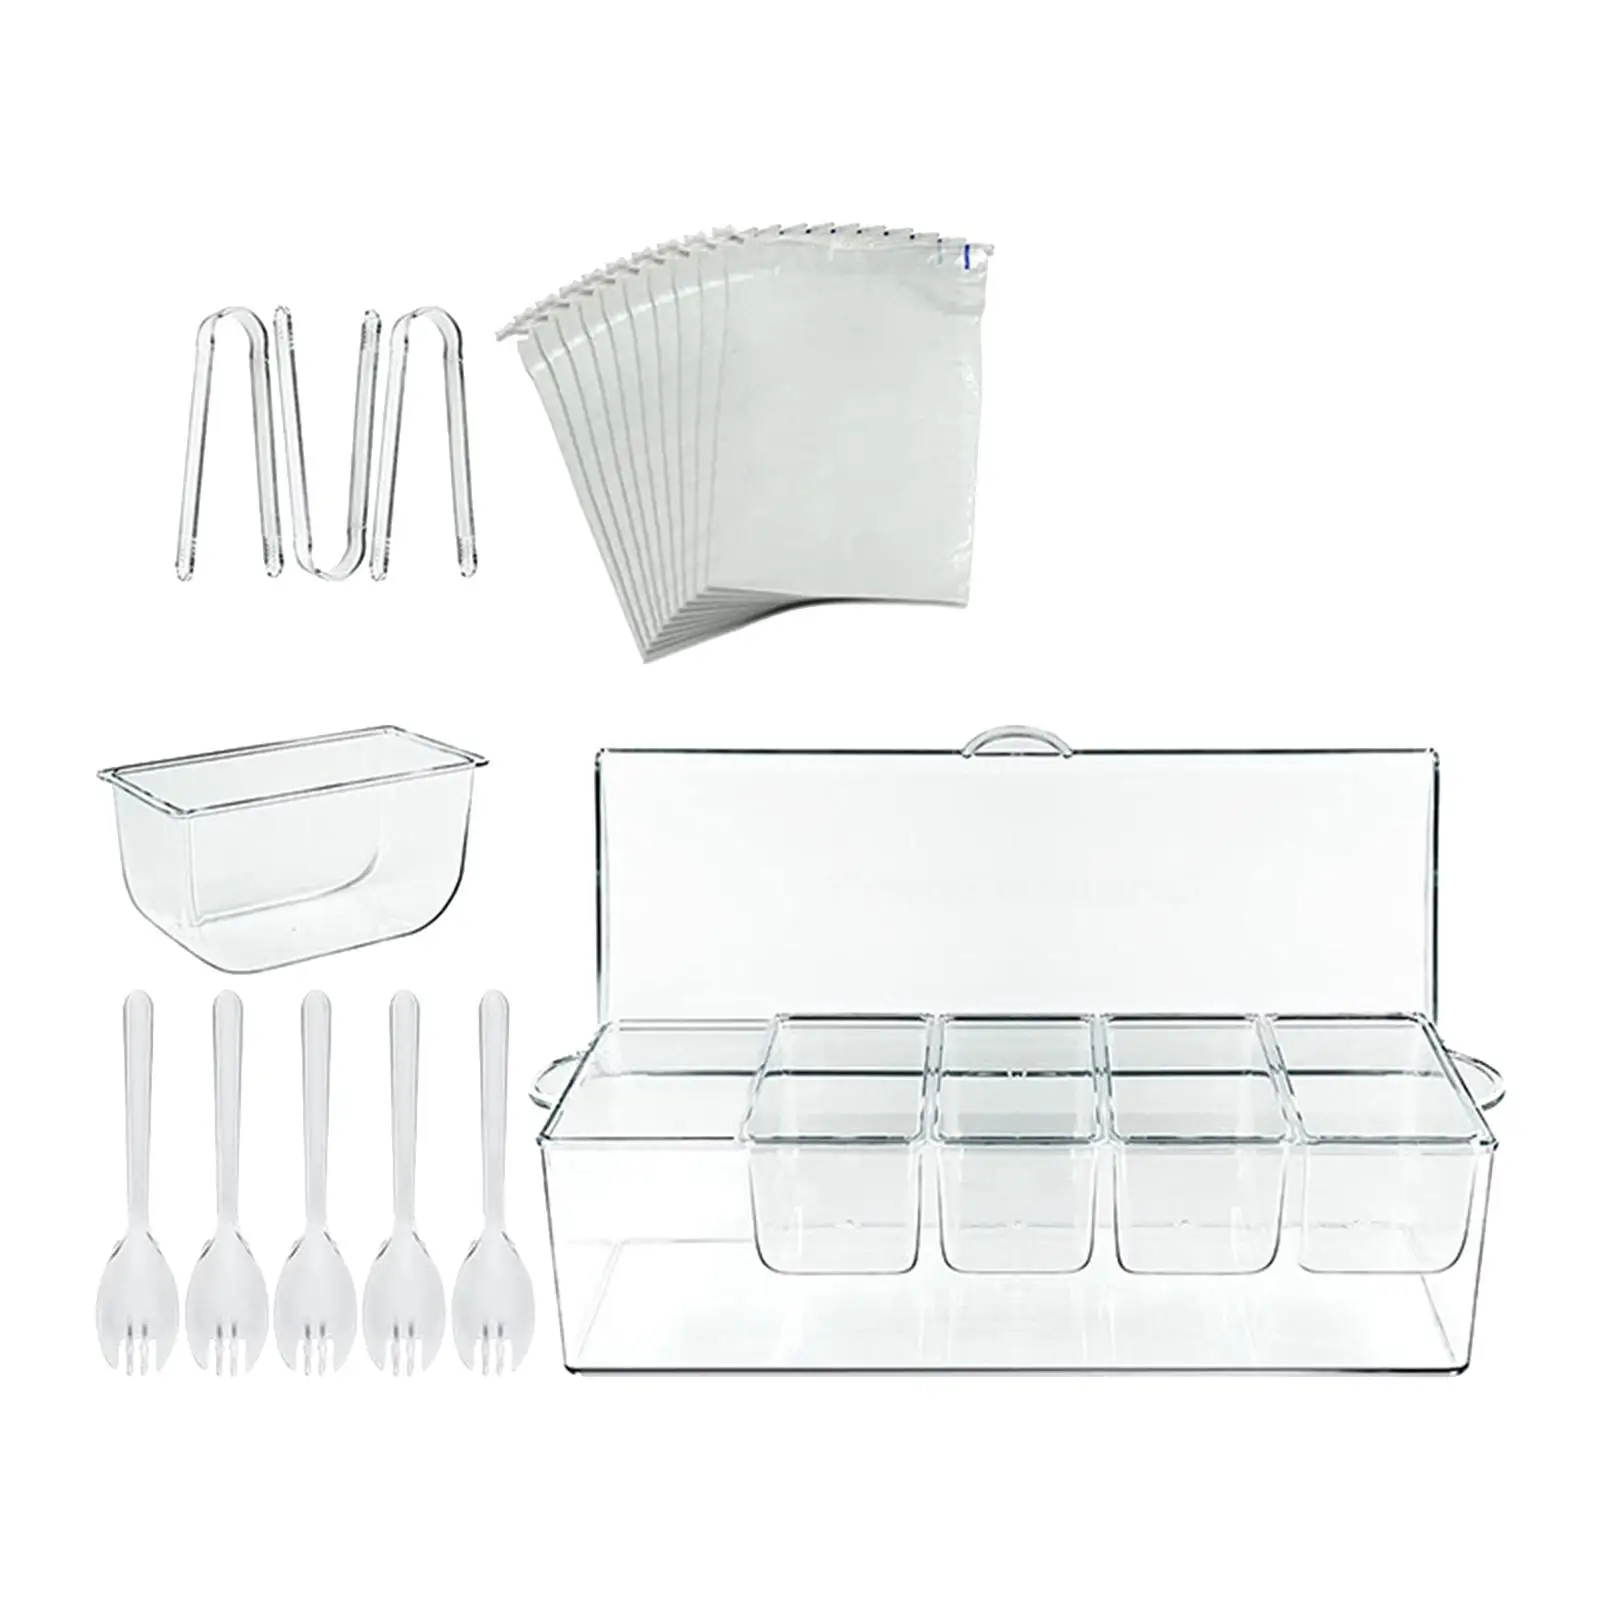 Ice Chilled Serving Tray Set 5 Compartment Sturdy 16x6.3x4.4inch Clear Garnish Tray Salad Platter for Indoor and Outdoor